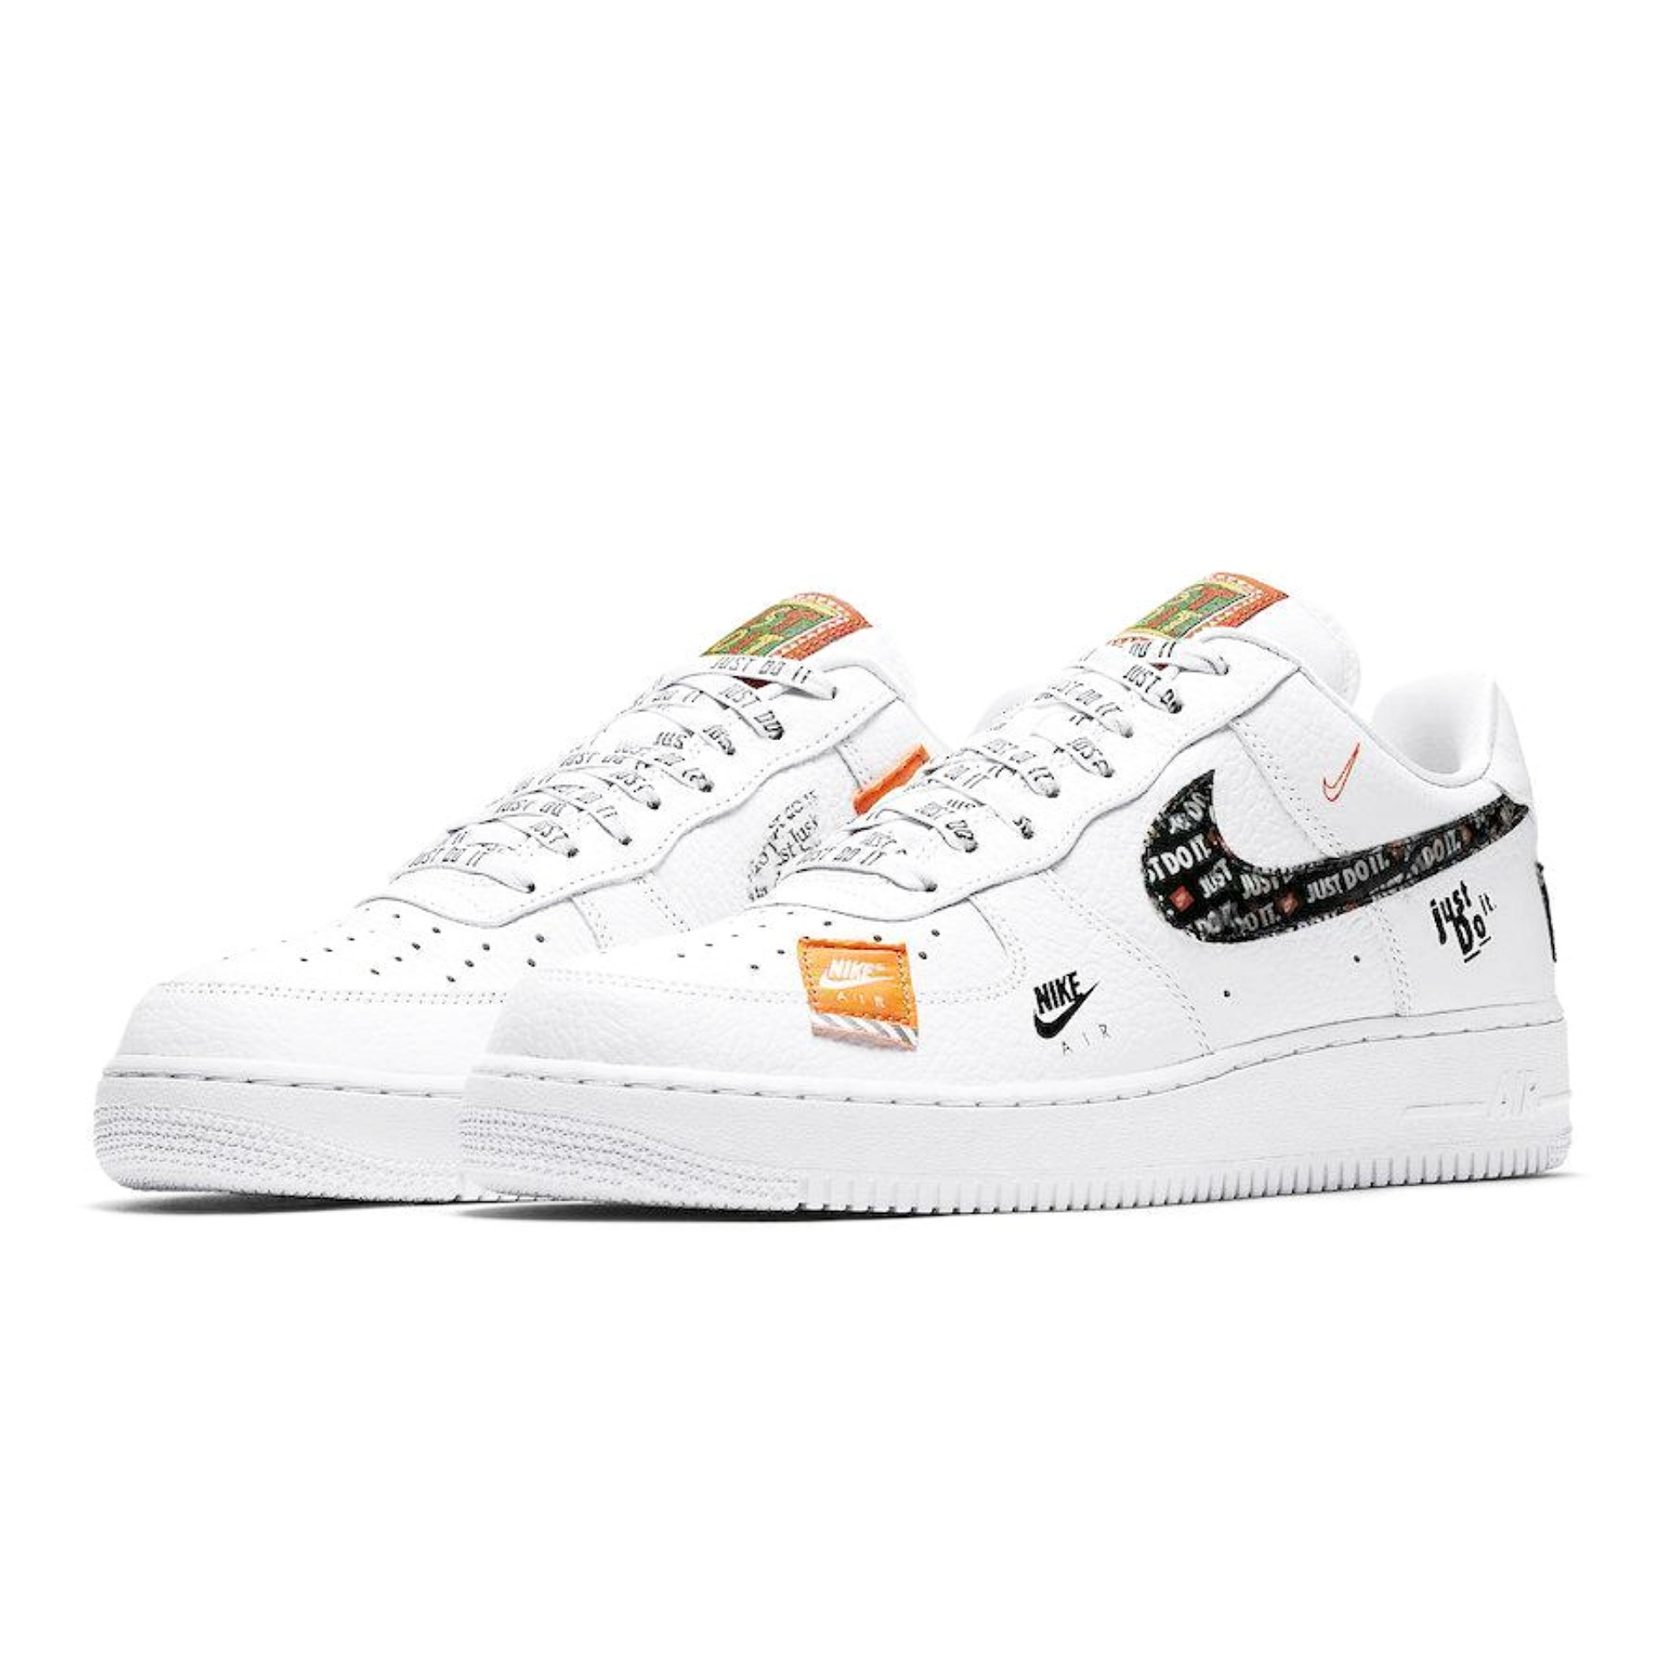 nike air force 1 white just do it